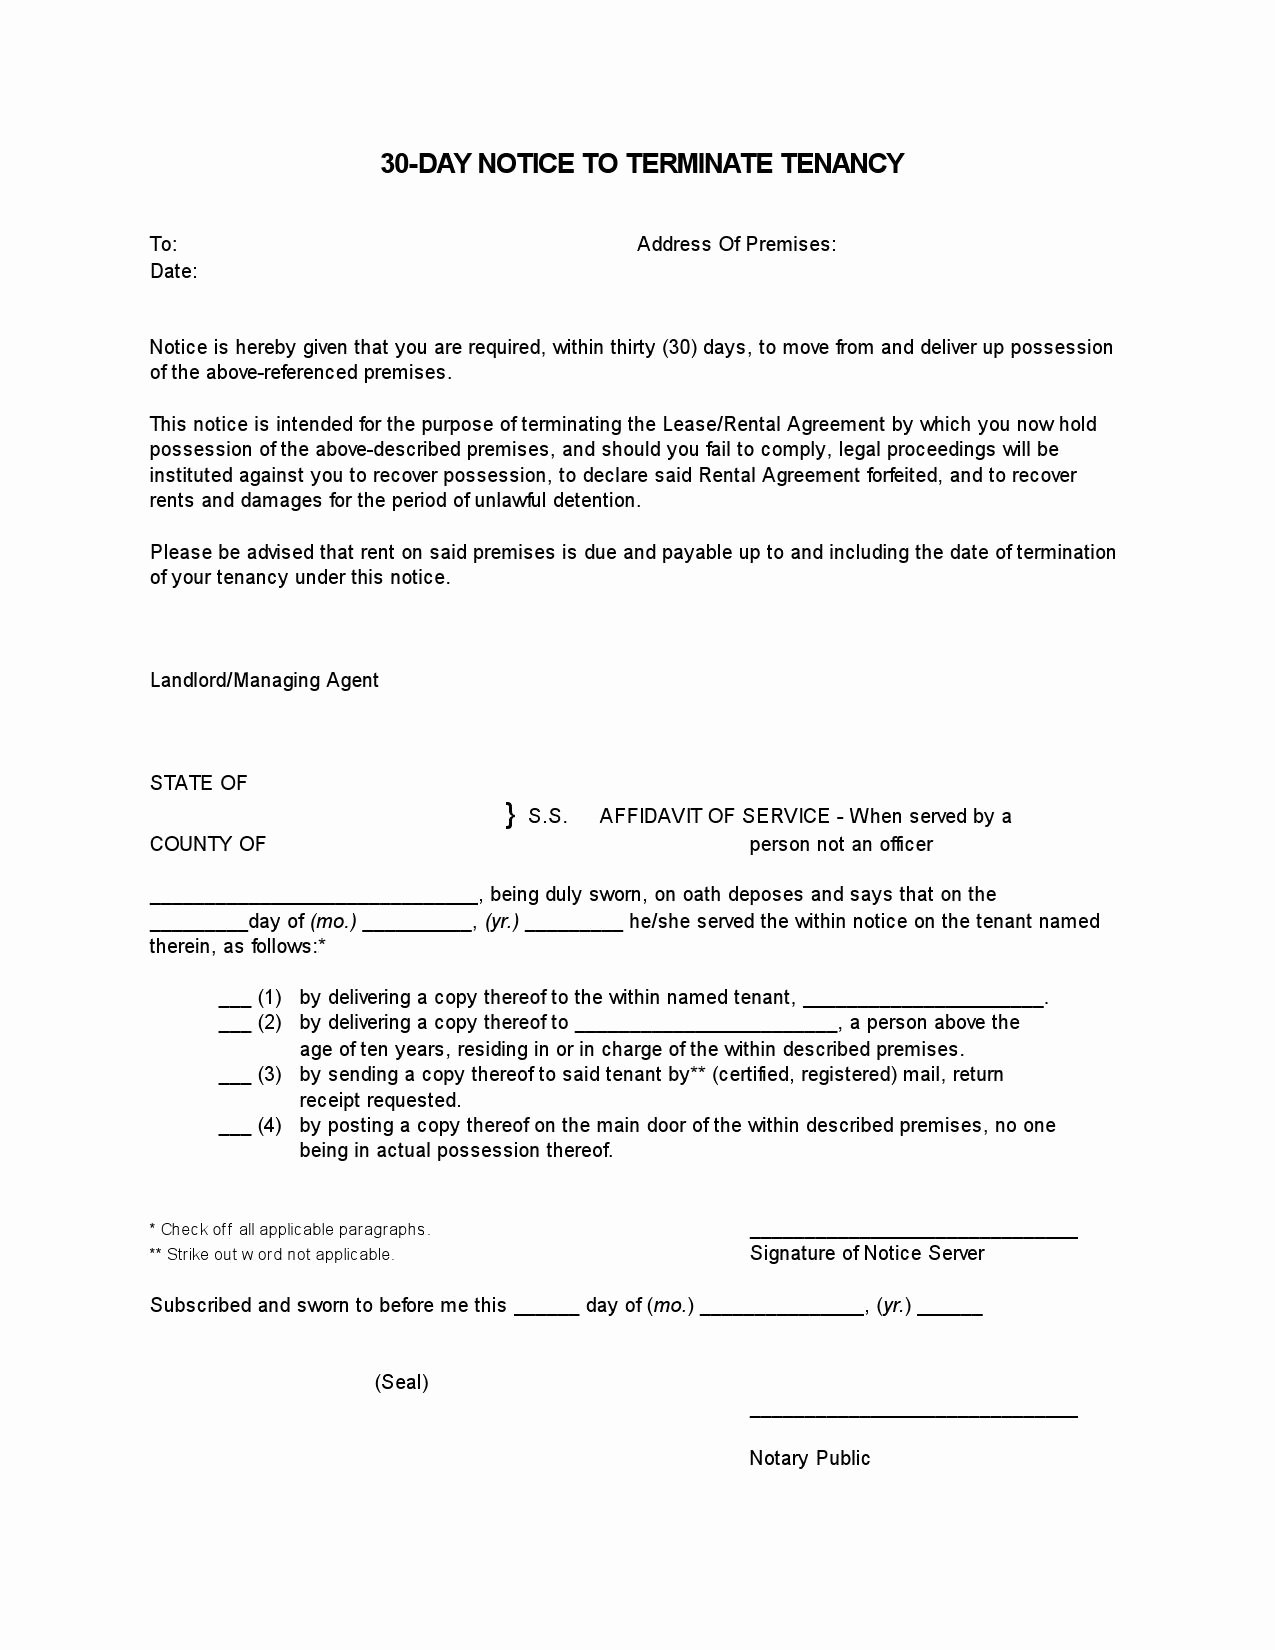 30 Day Notice to Tenant California Template Fresh Free Printable 30 Day Notice to Vacate Terminate Tenancy